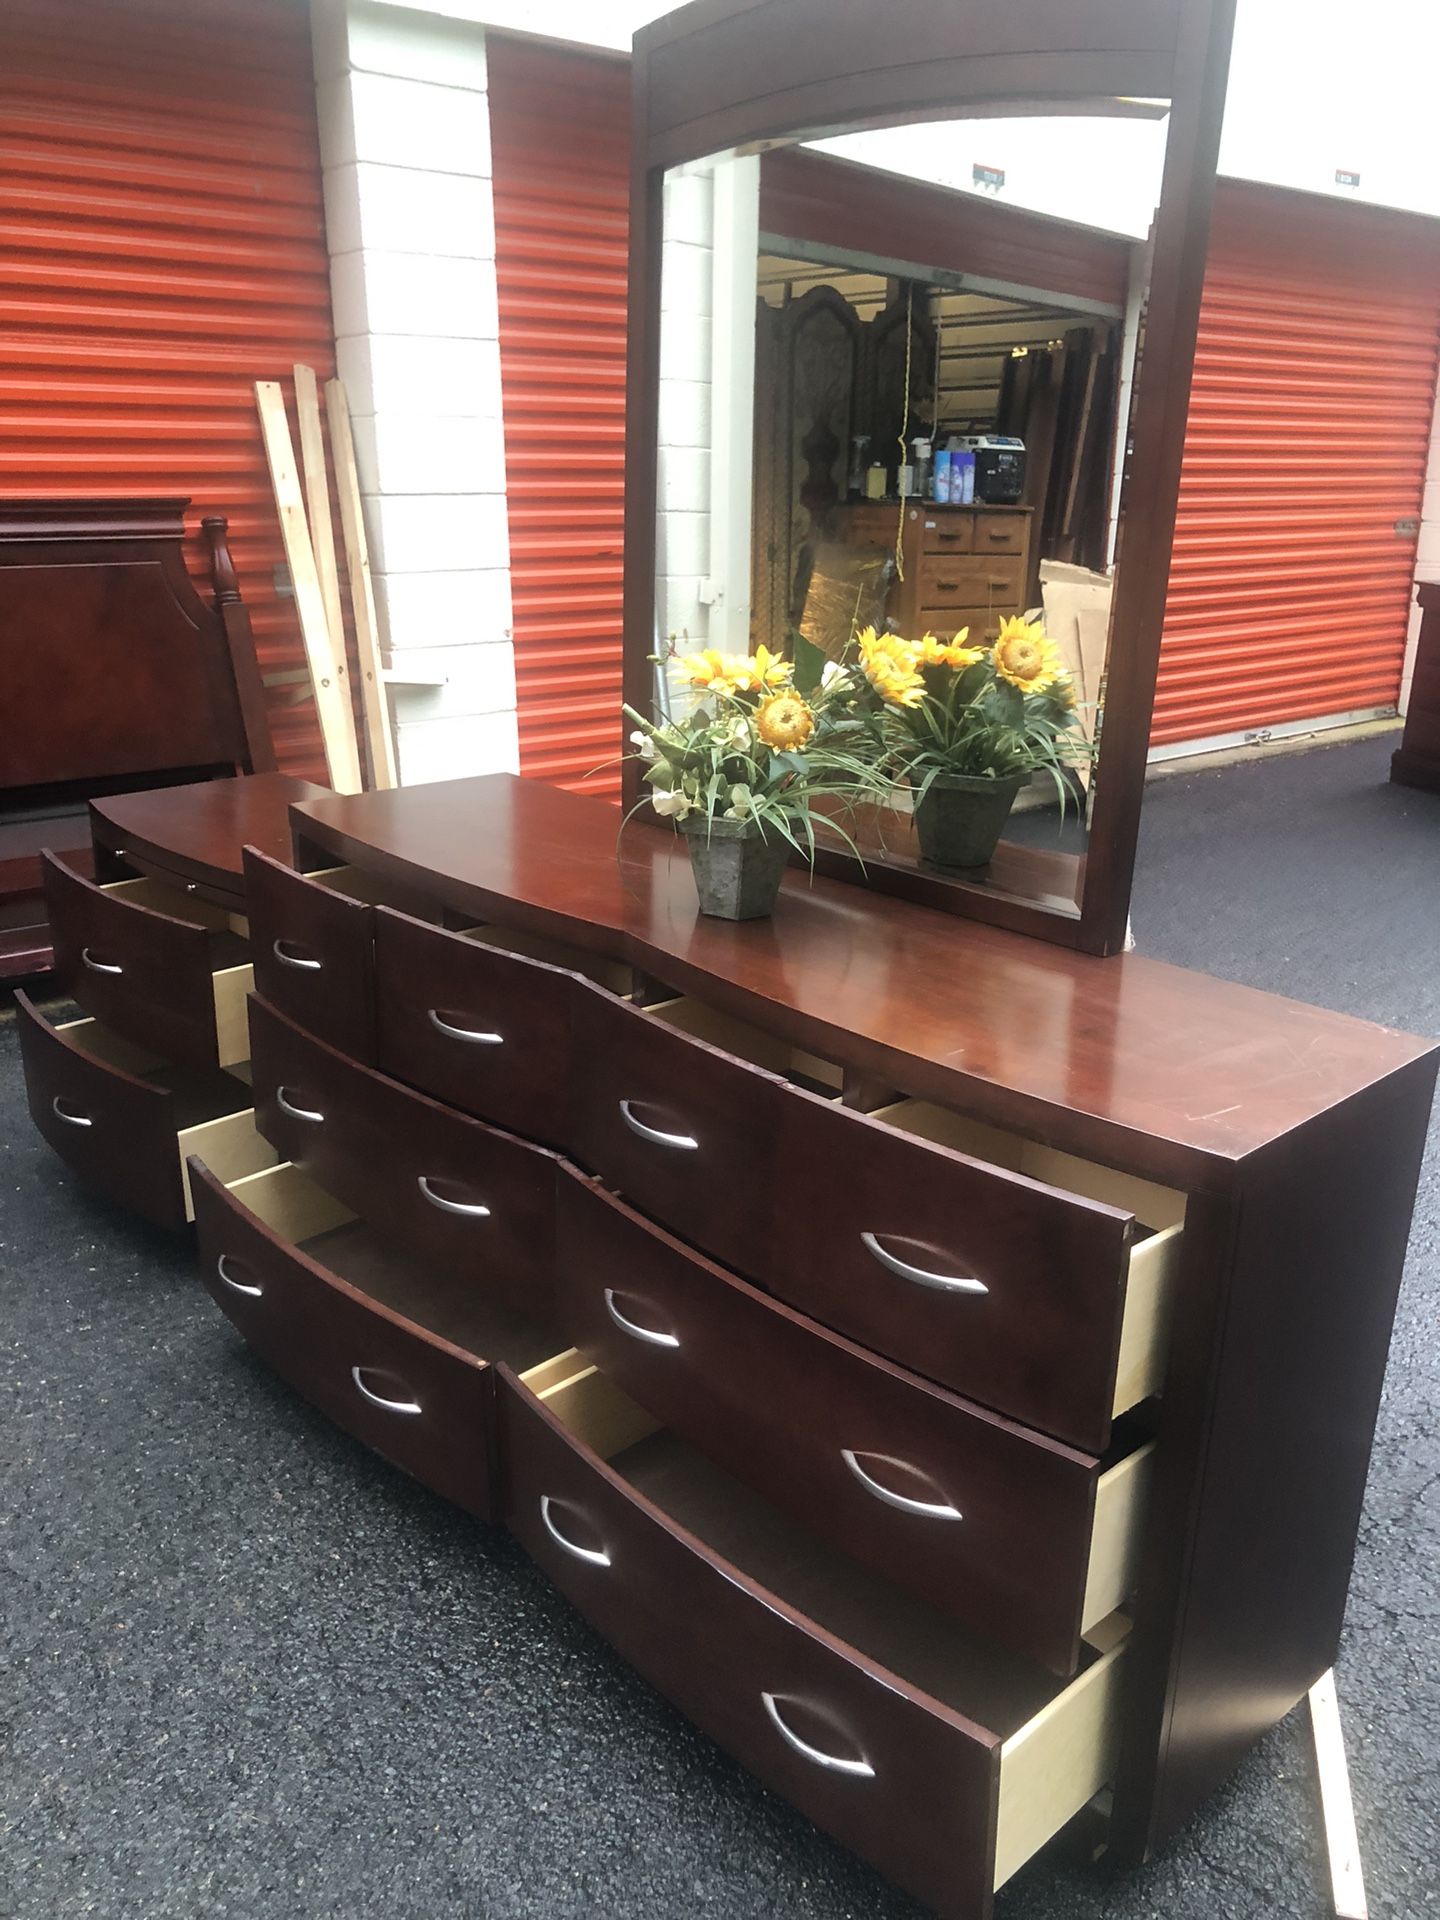 Quality Set Solid Wood Long Dresser, Big Drawers, Big Mirror, Big Nightstand. Drawers Sliding Smoothly Great Confition